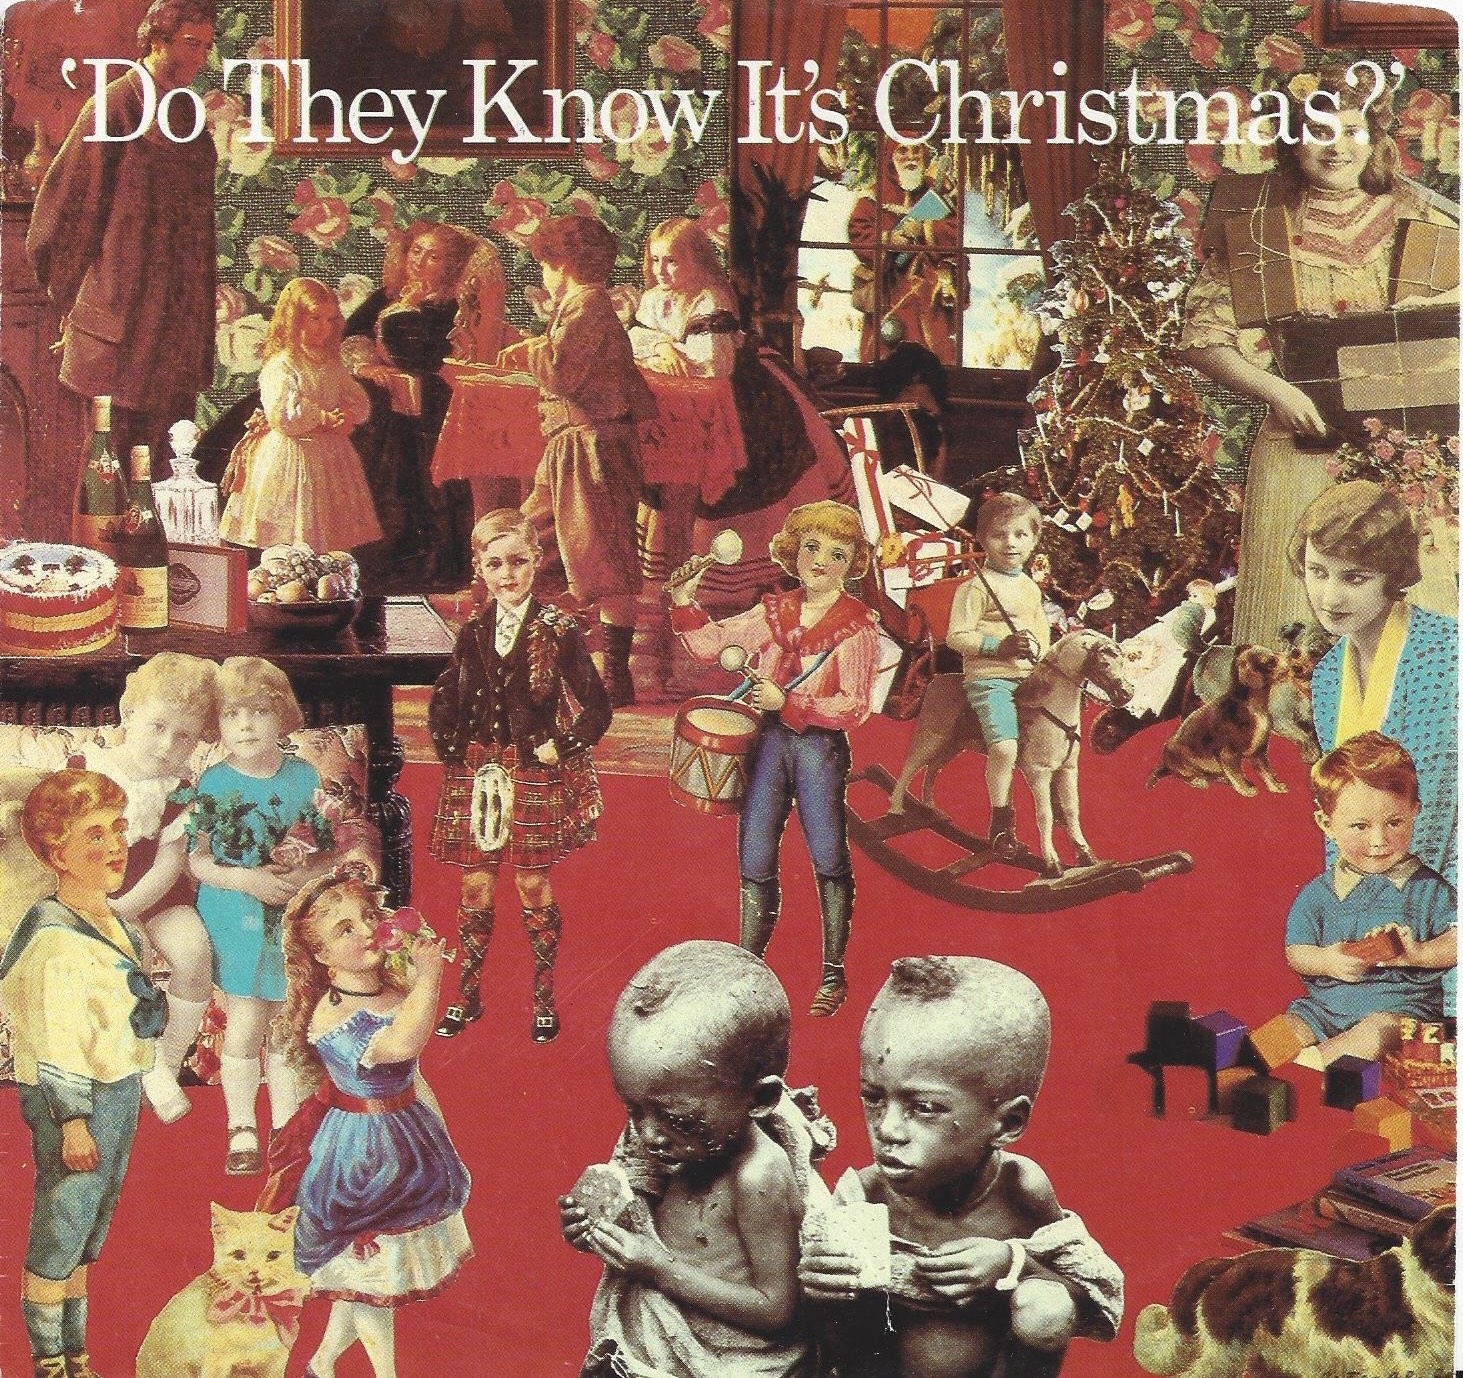 The Dark Legacy of "Do They Know It’s Christmas?"